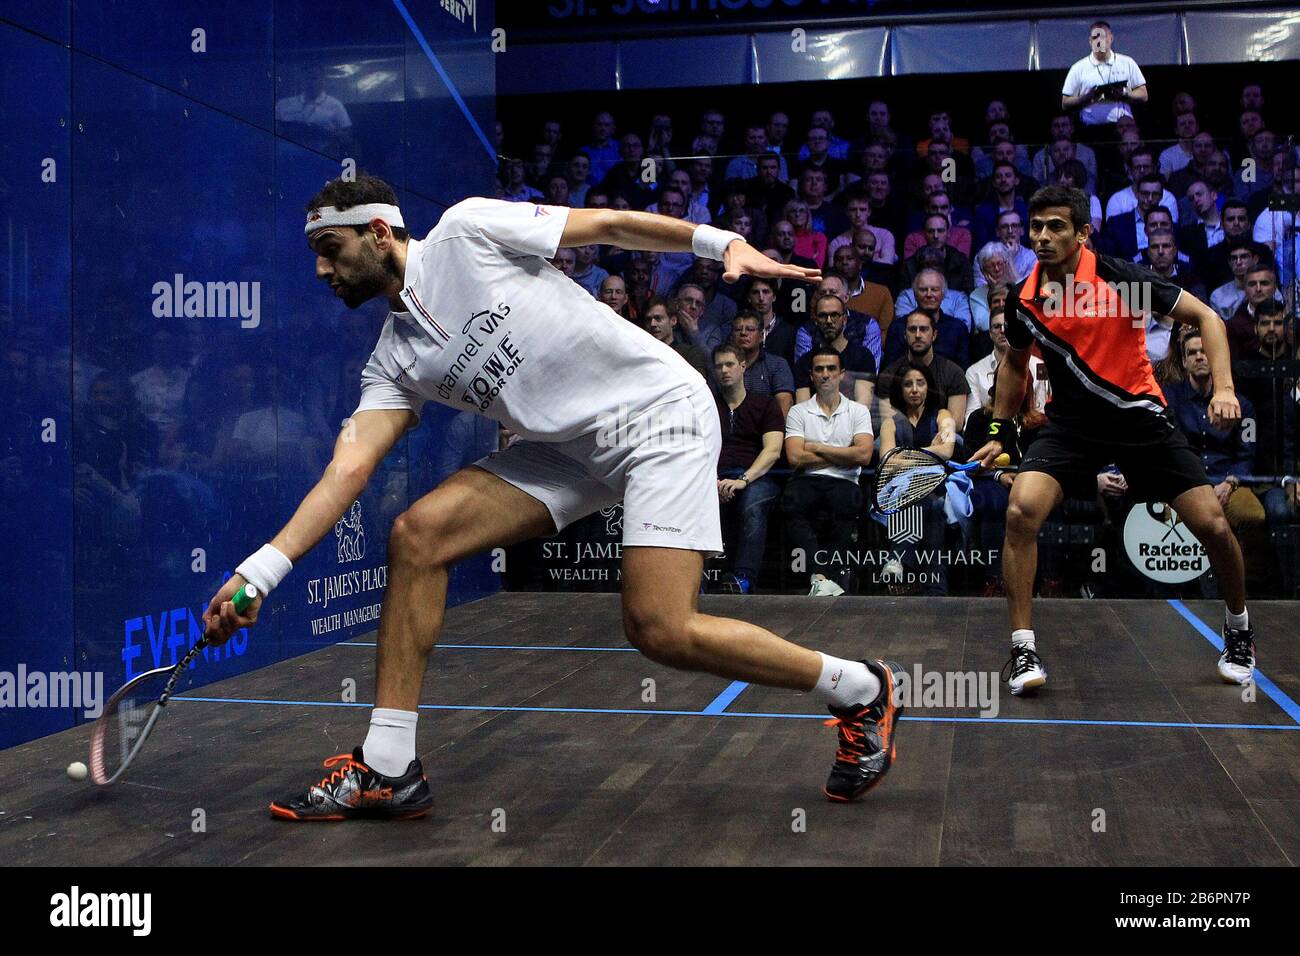 Londra, Regno Unito. 10th Mar, 2020. Mohammed El Shorbagy d'Egitto (L) in azione contro Ghossal di (R). St. James's Place Canary Wharf Classic 2020 Squash, 4° giorno presso l'East Wintergarden di Canary Wharf, Londra Mercoledì 11th Marzo 2020 pic by Steffan Bowen/Andrew Orchard sports photography/Alamy Live News Credit: Andrew Orchard sports photography/Alamy Live News Foto Stock